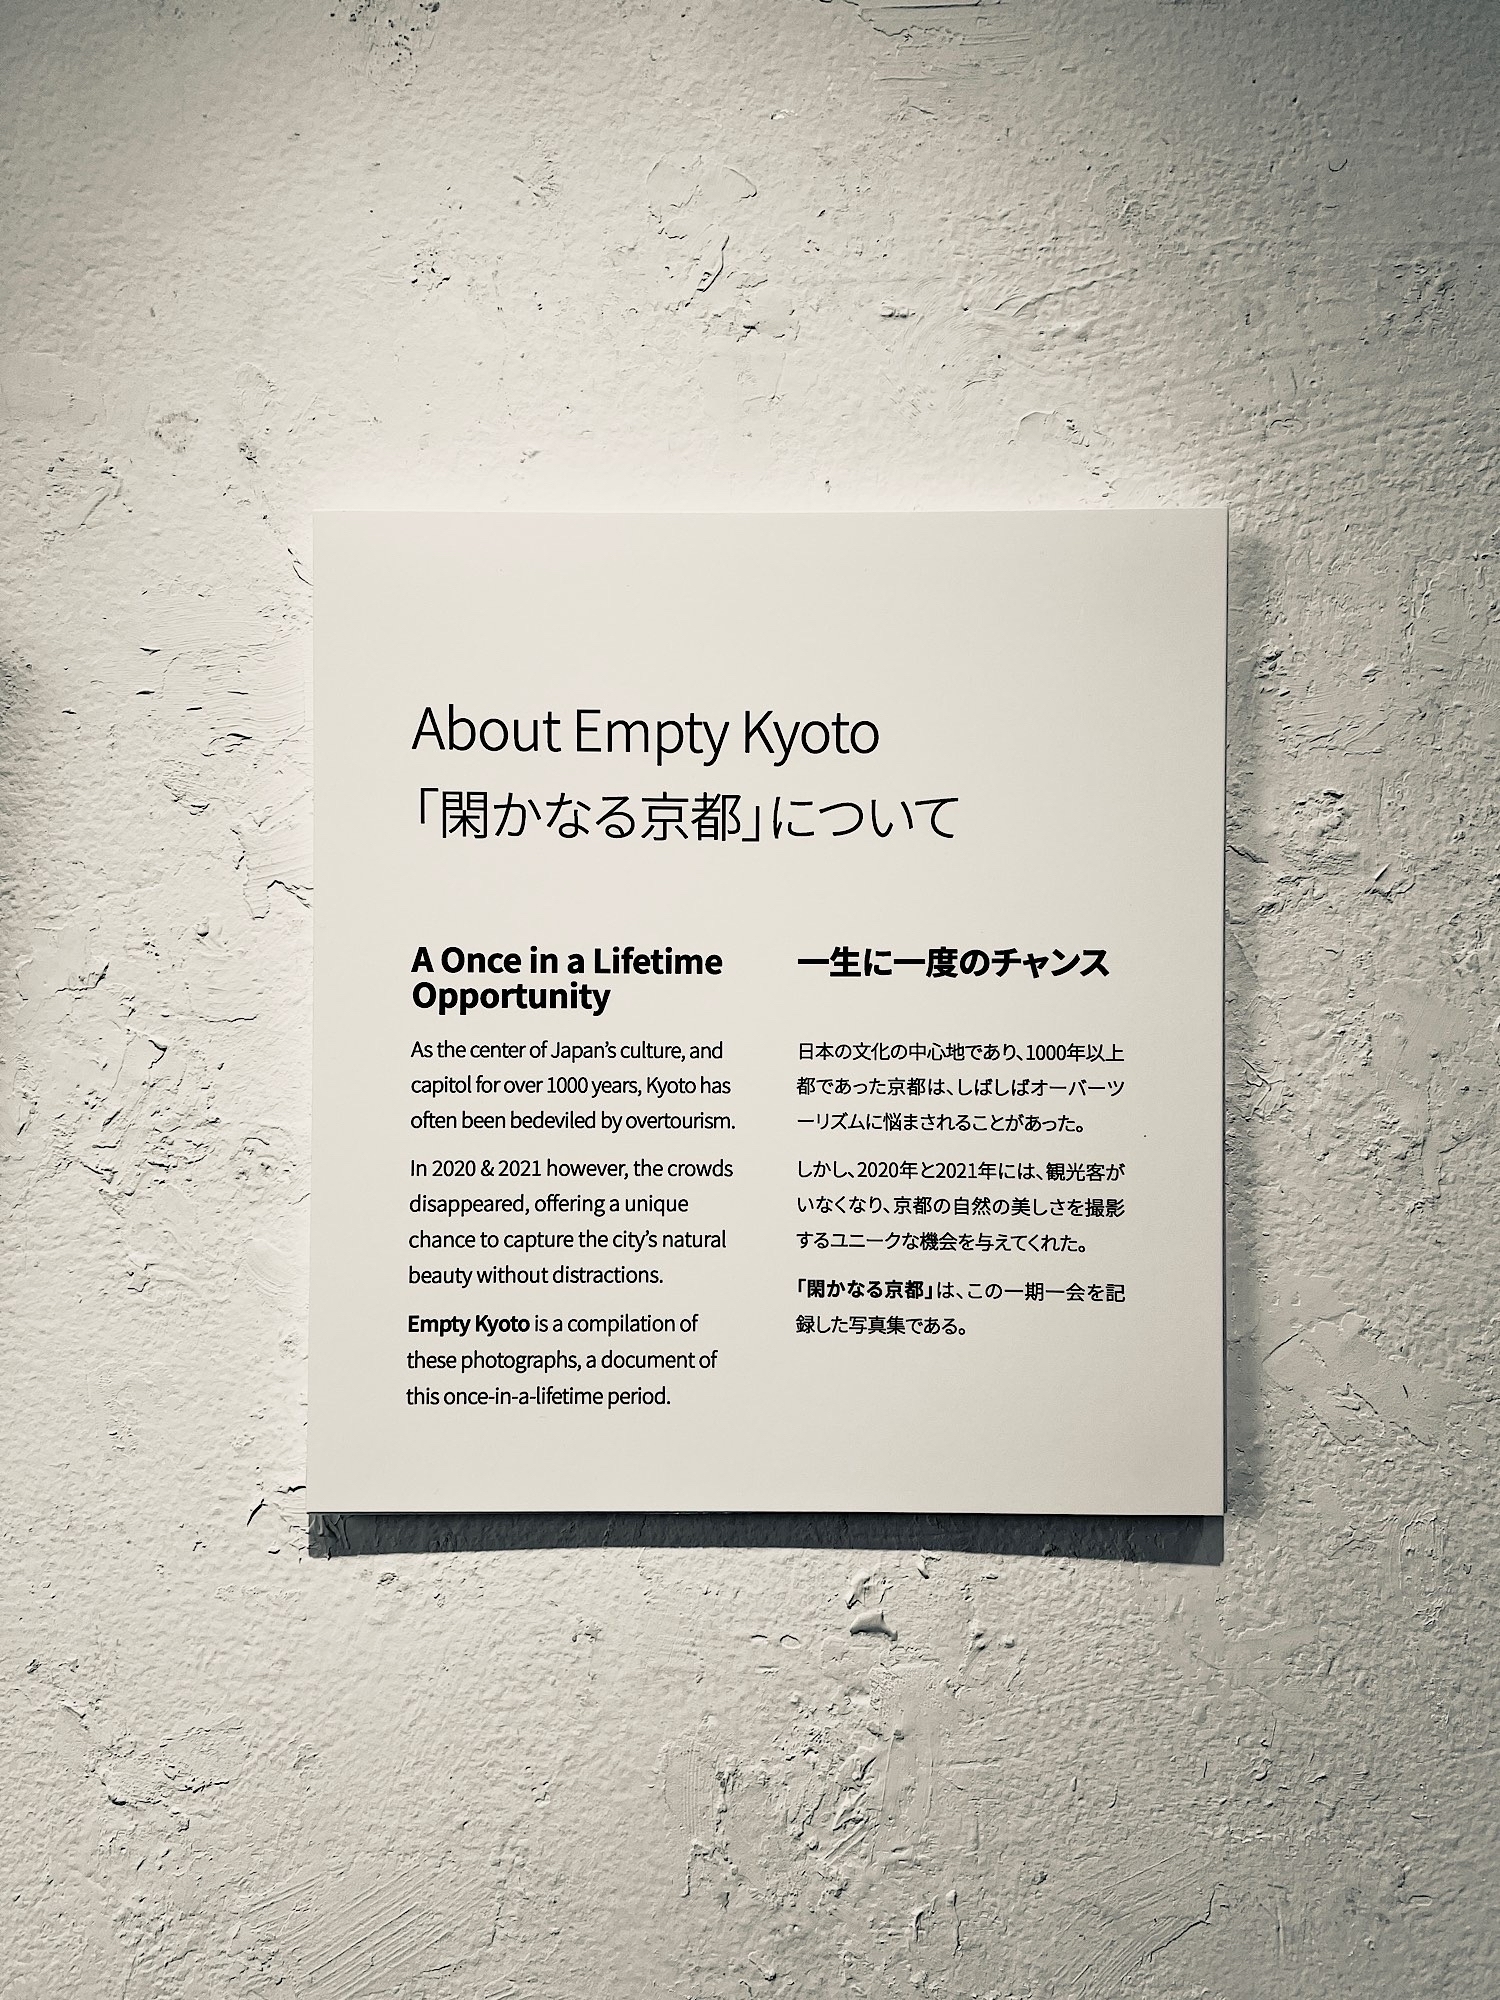 Sign describing what Empty Kyoto is about. In English the sign says: &10;&10;A Once in a Lifetime Opportunity&10;As the center of Japan's culture, and capitol for over 1000 years, Kyoto has often been bedeviled by overtourism.&10;&10;In 2020 & 2021 however, the crowds disappeared, offering a unique chance to capture the city's natural beauty without distractions.&10;&10;Empty Kyoto is a compilation of these photographs, a document of this once-in-a-litetime period.